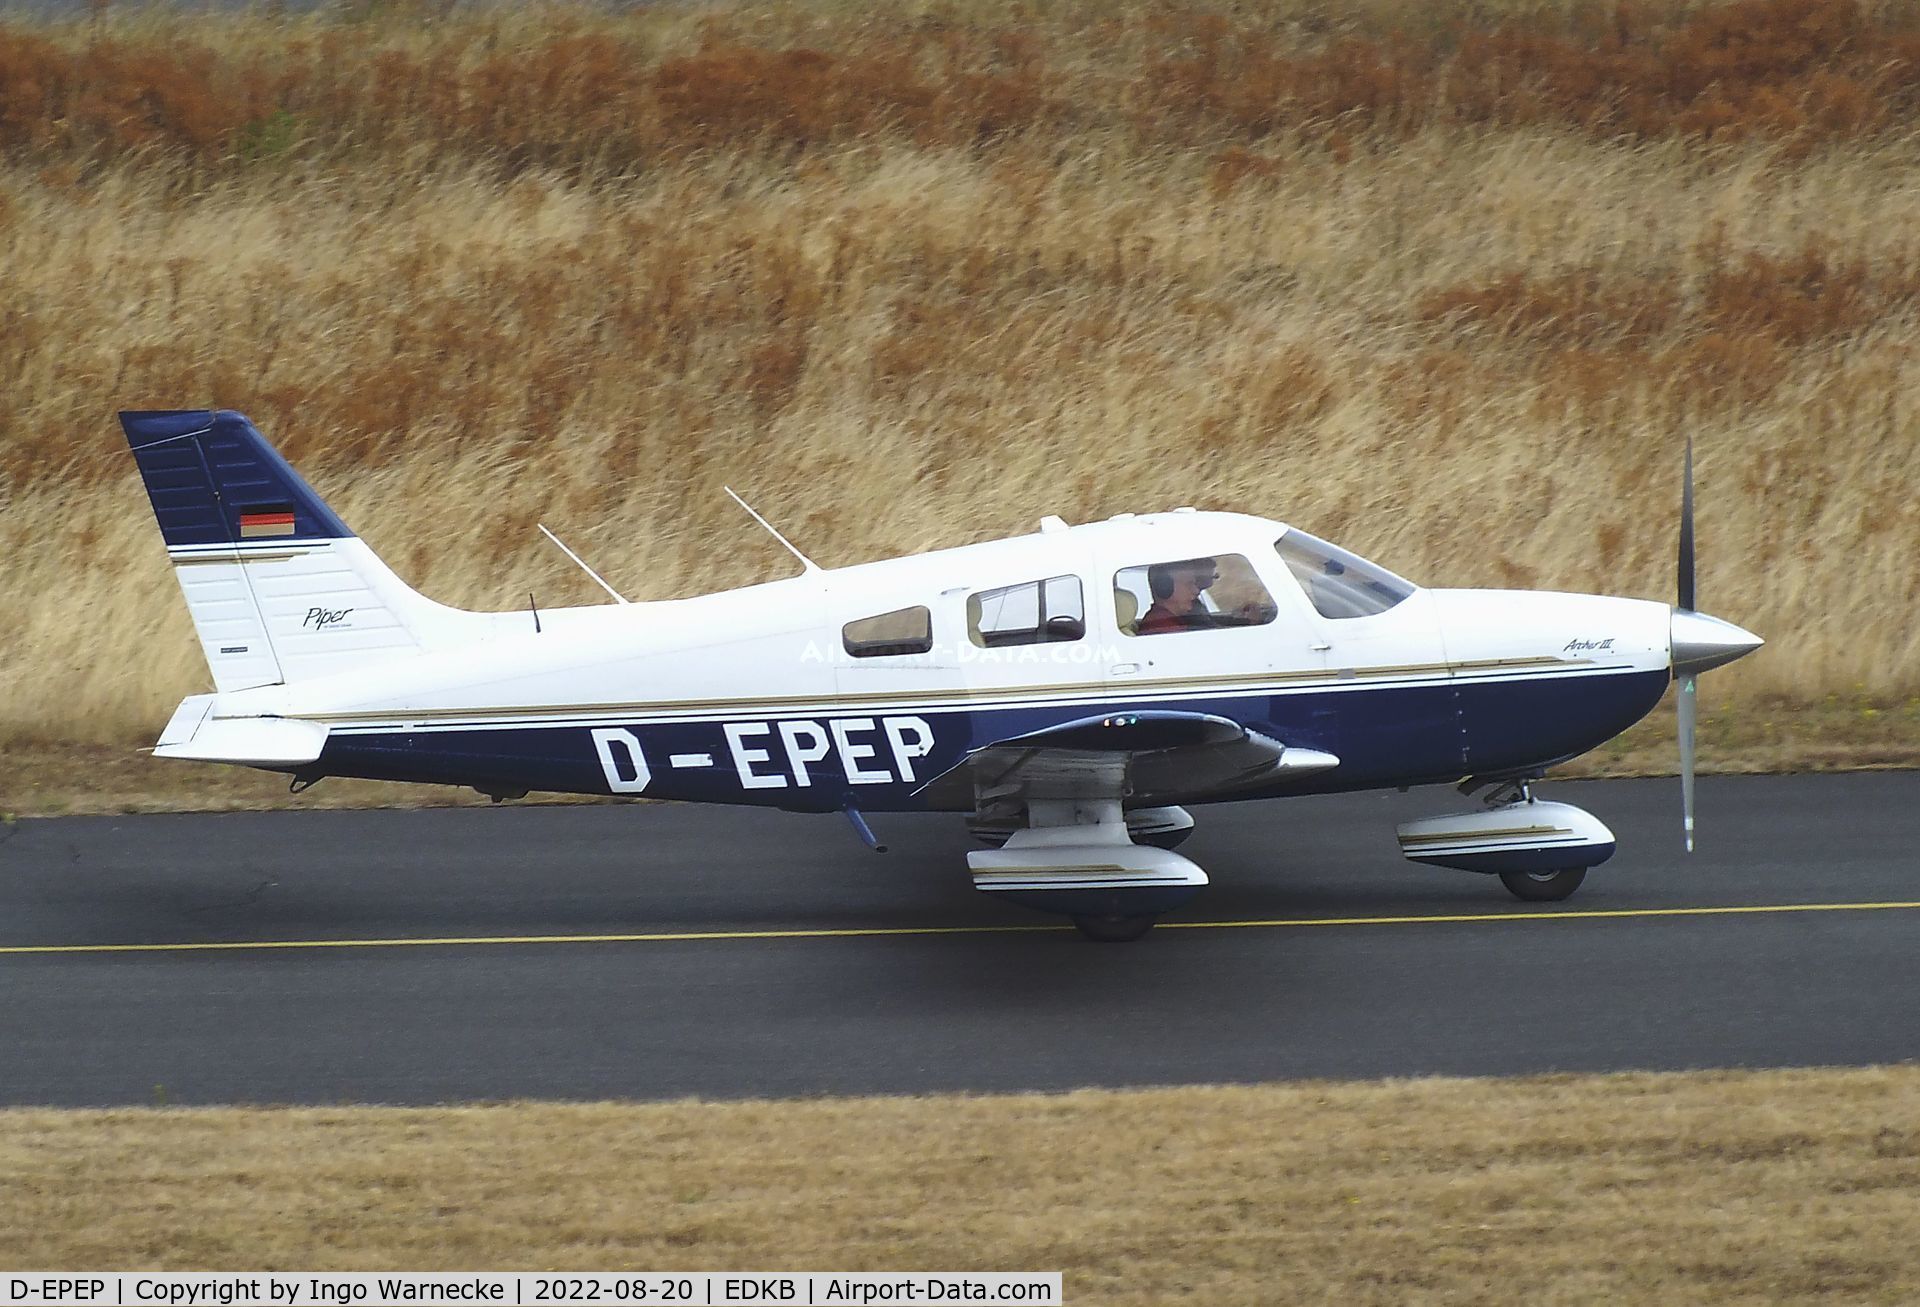 D-EPEP, 2016 Piper PA-28-181 C/N 2890217, Piper PA-28-181 Archer III at Bonn-Hangelar airfield during the Grumman Fly-in 2022